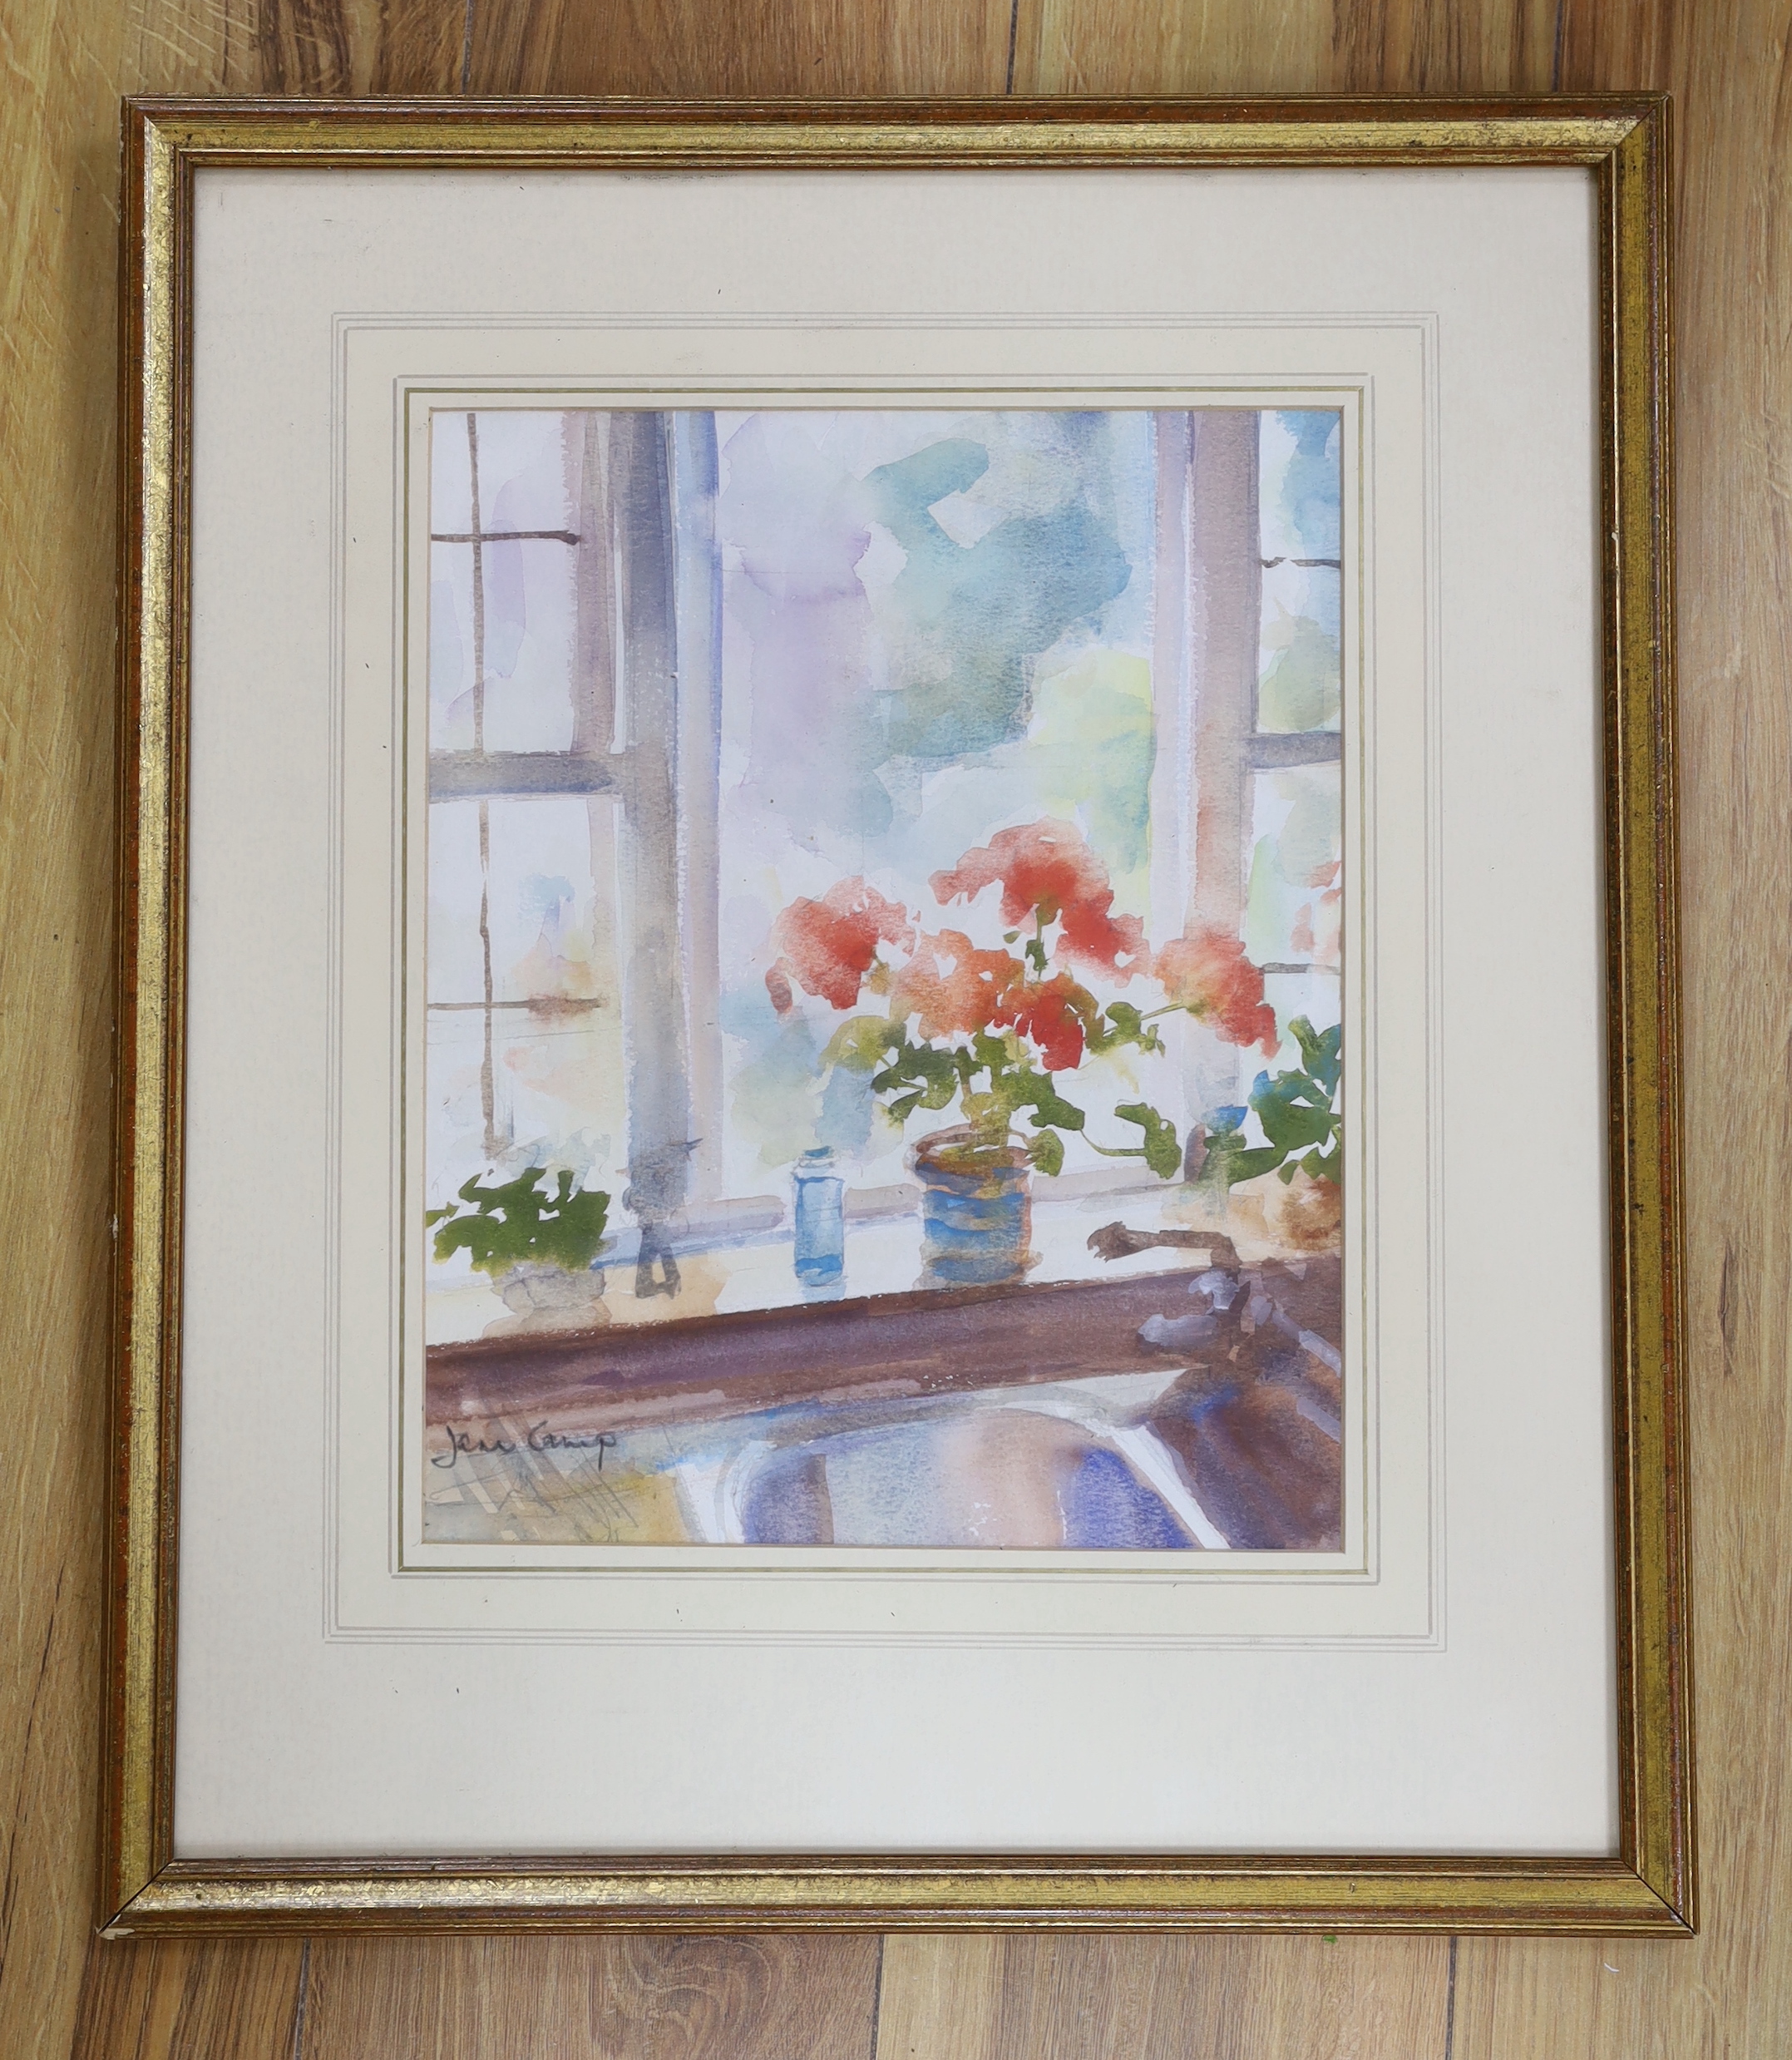 Jane Camp, watercolour, Pelargoniums on a window sill, signed, 32 x 26cm